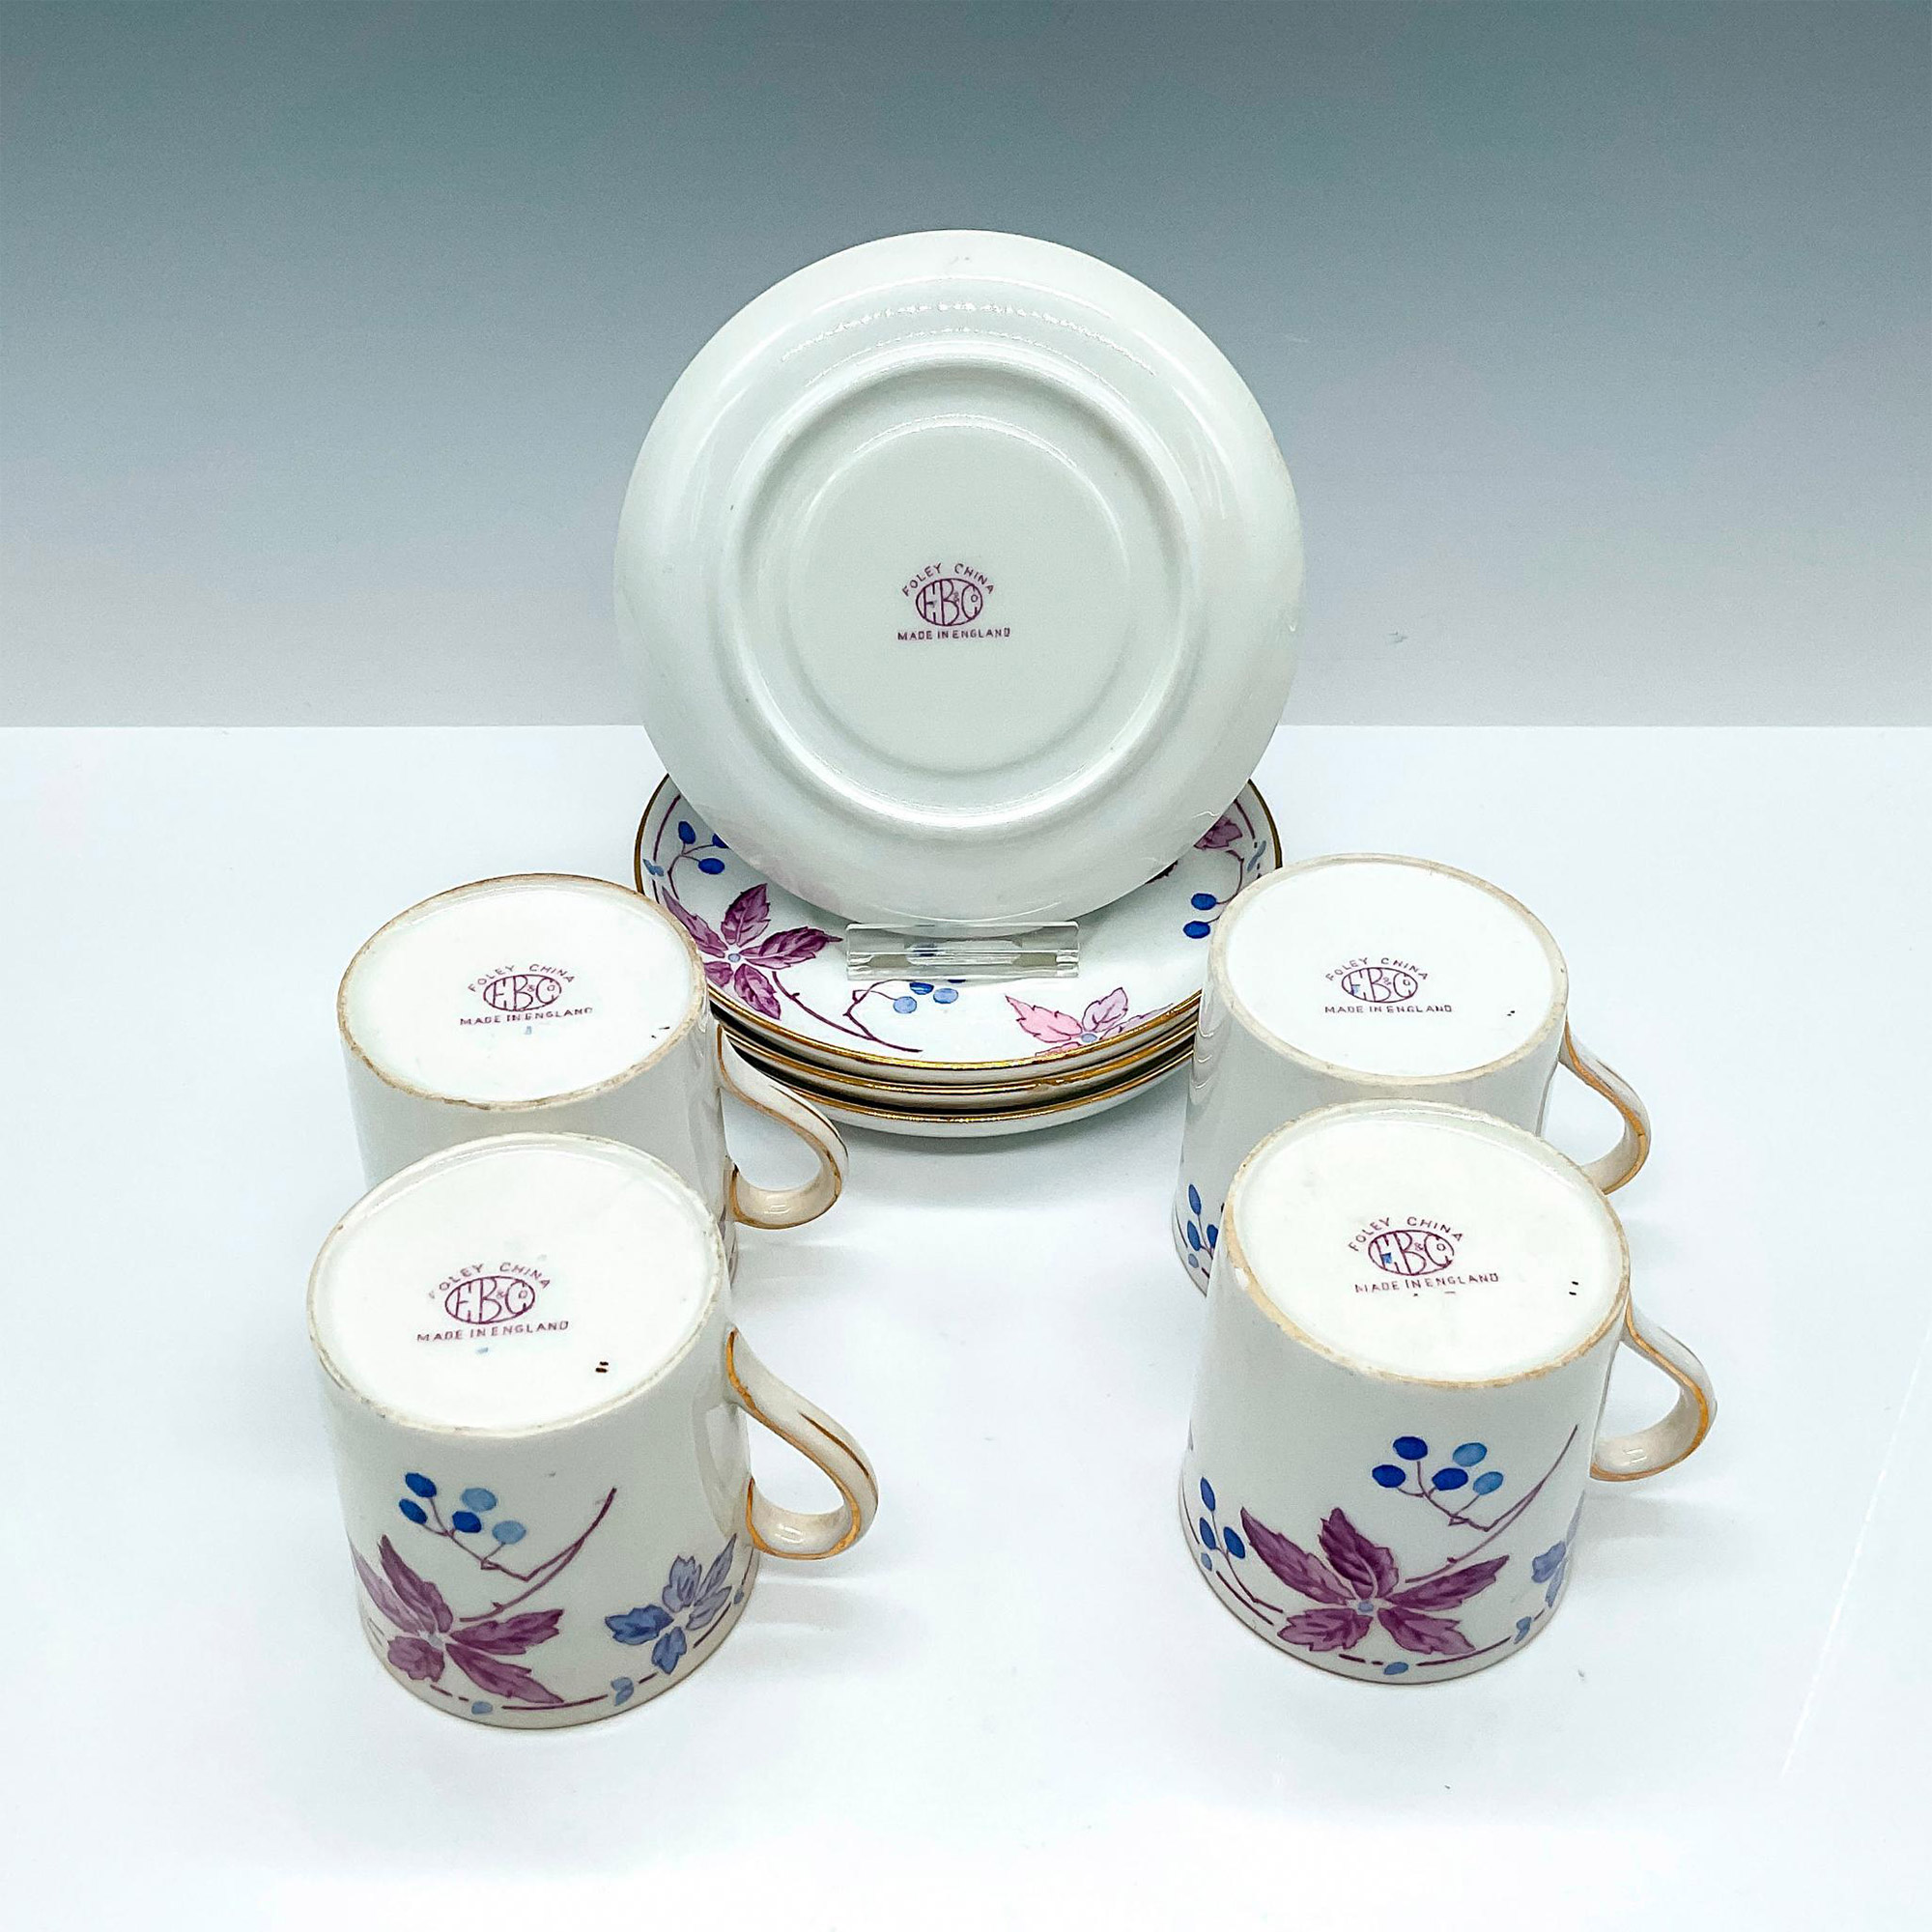 8pc Foley China Demitasse Cups and Saucers - Image 3 of 3